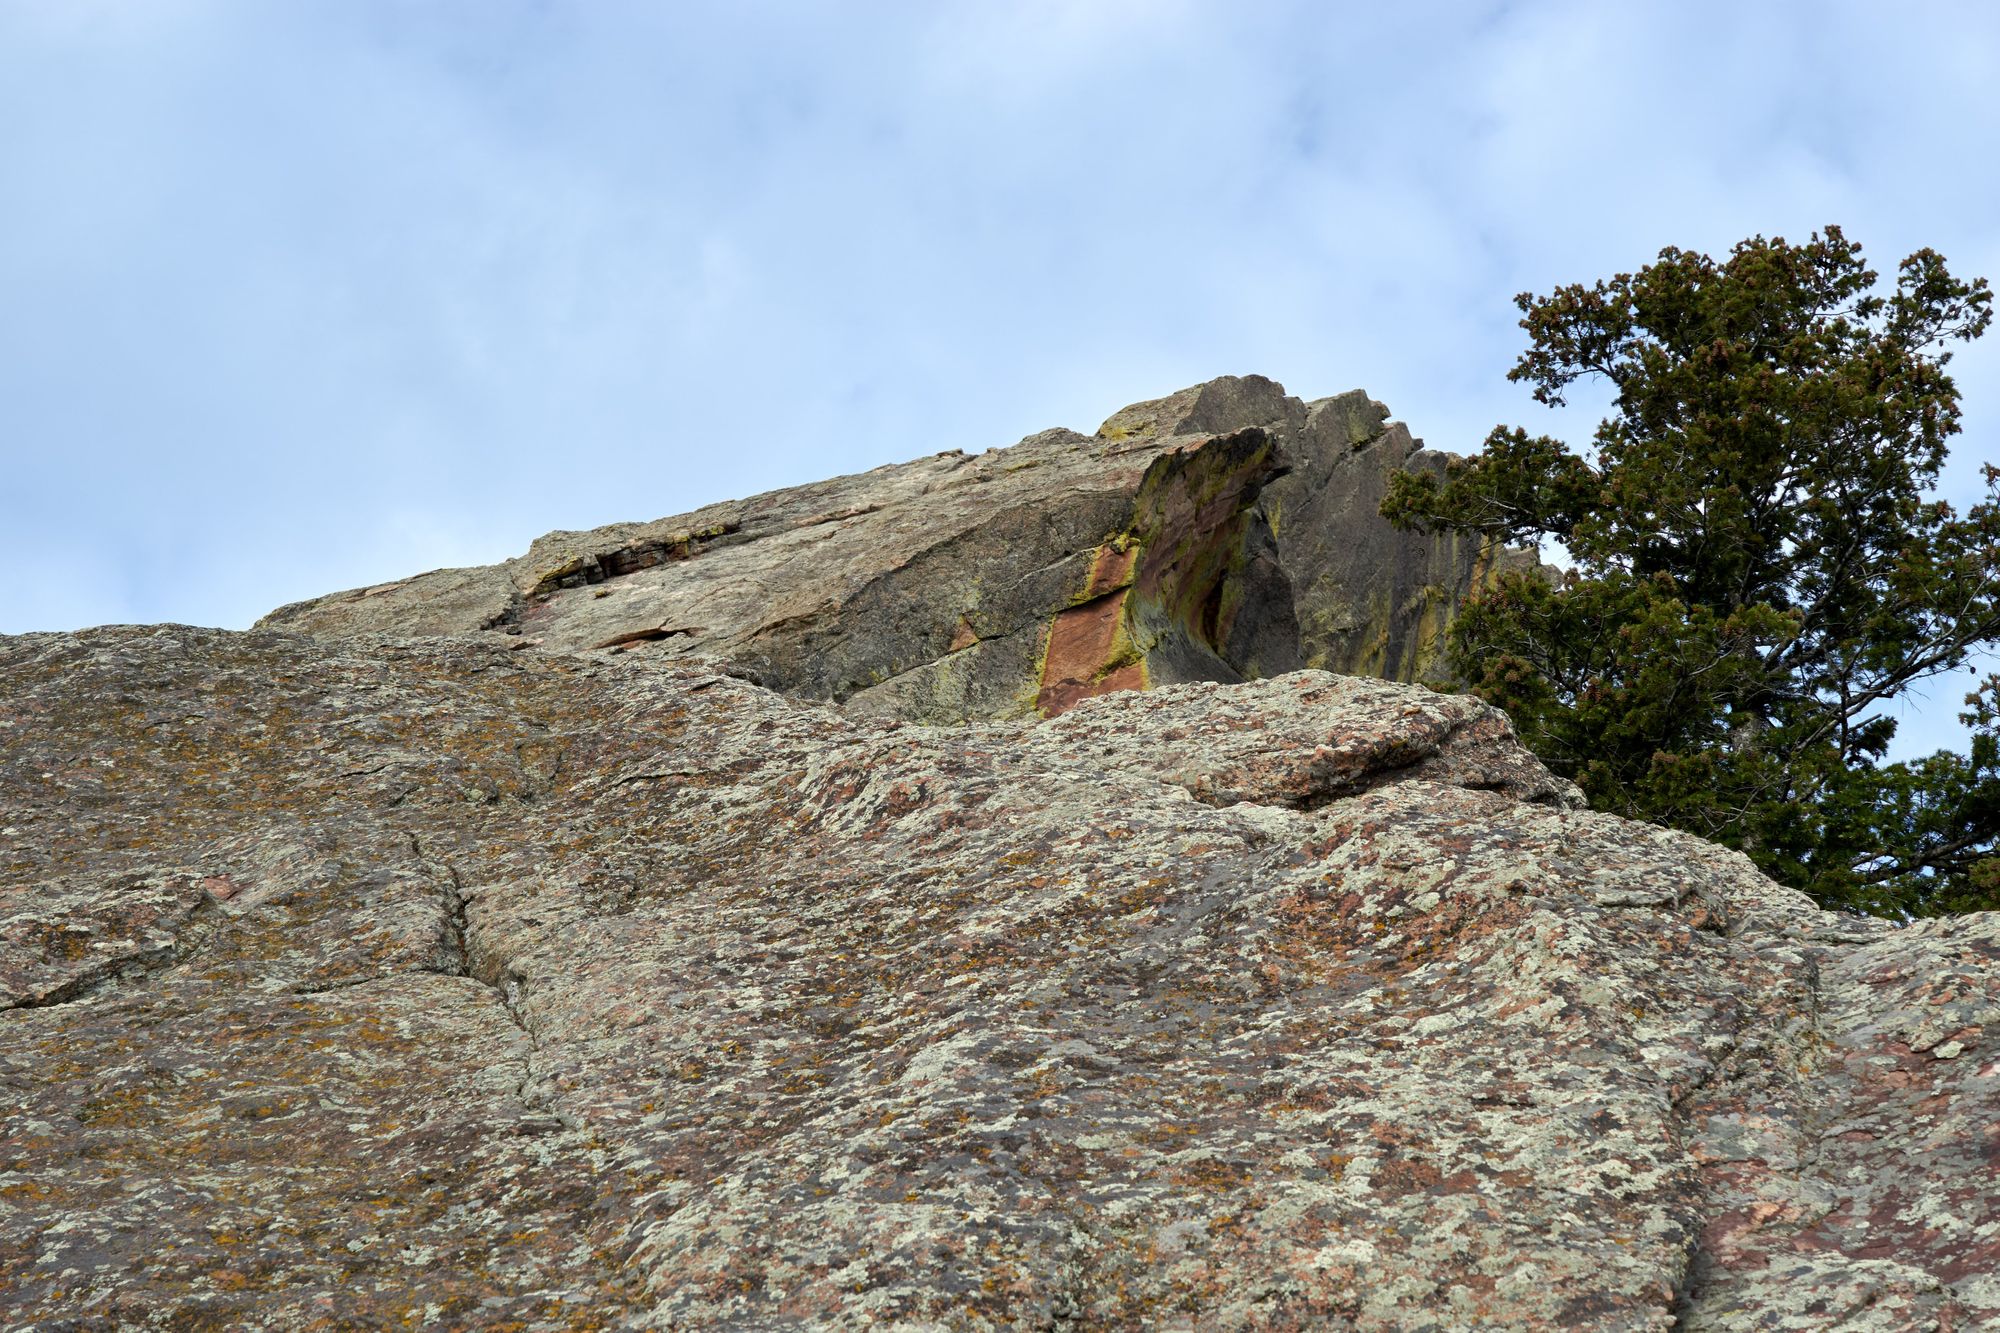 Looking up at a gently sloped rock climb.